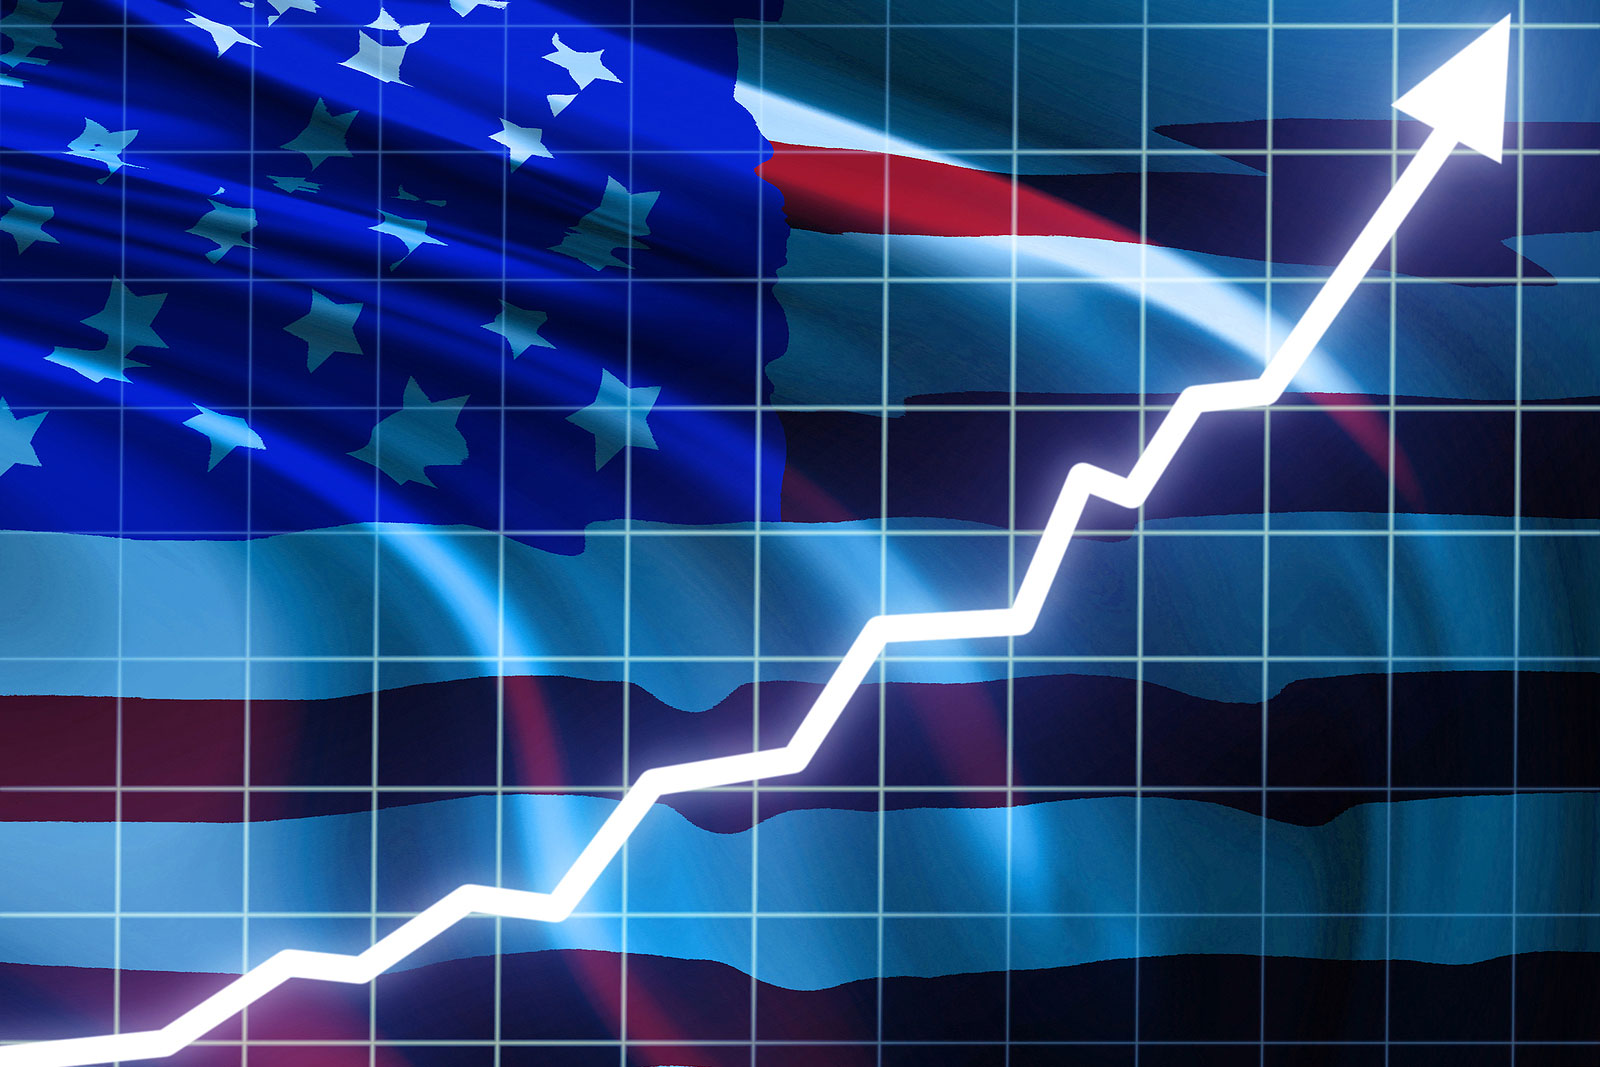 US Economy Sees Strong Start in First Quarter 2021